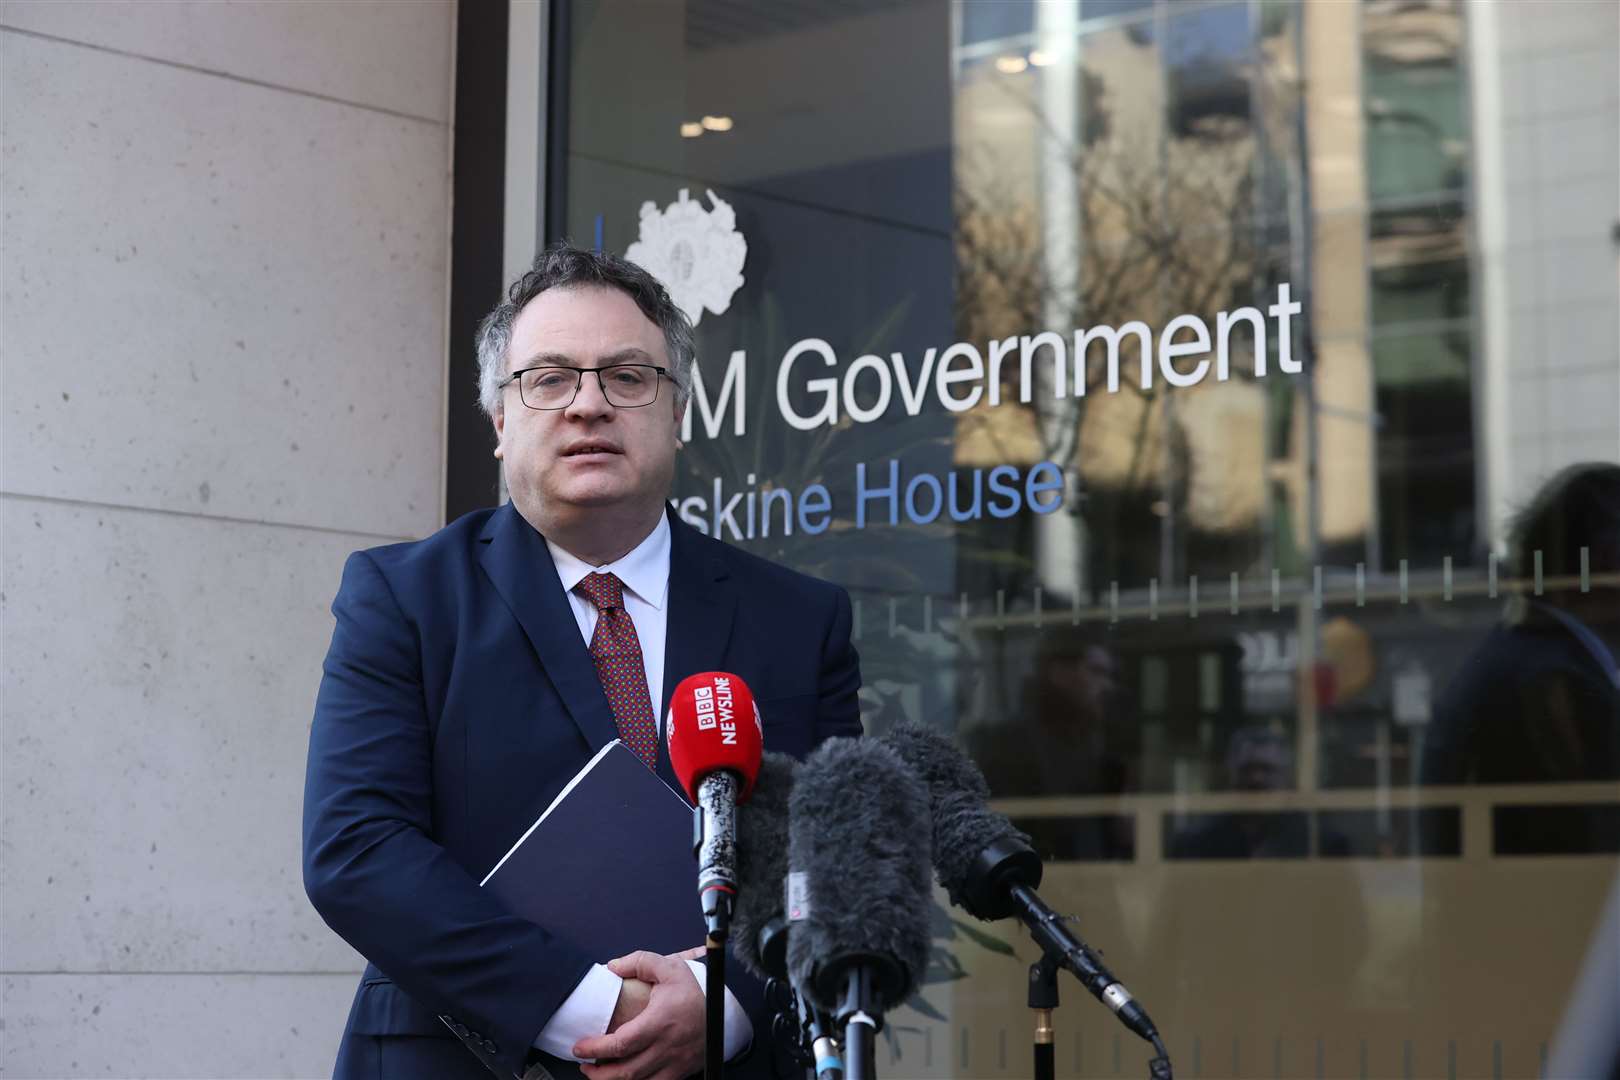 Alliance Party MP Stephen Farry speaking to the media outside Erskine House, Belfast (Liam McBurney/PA)